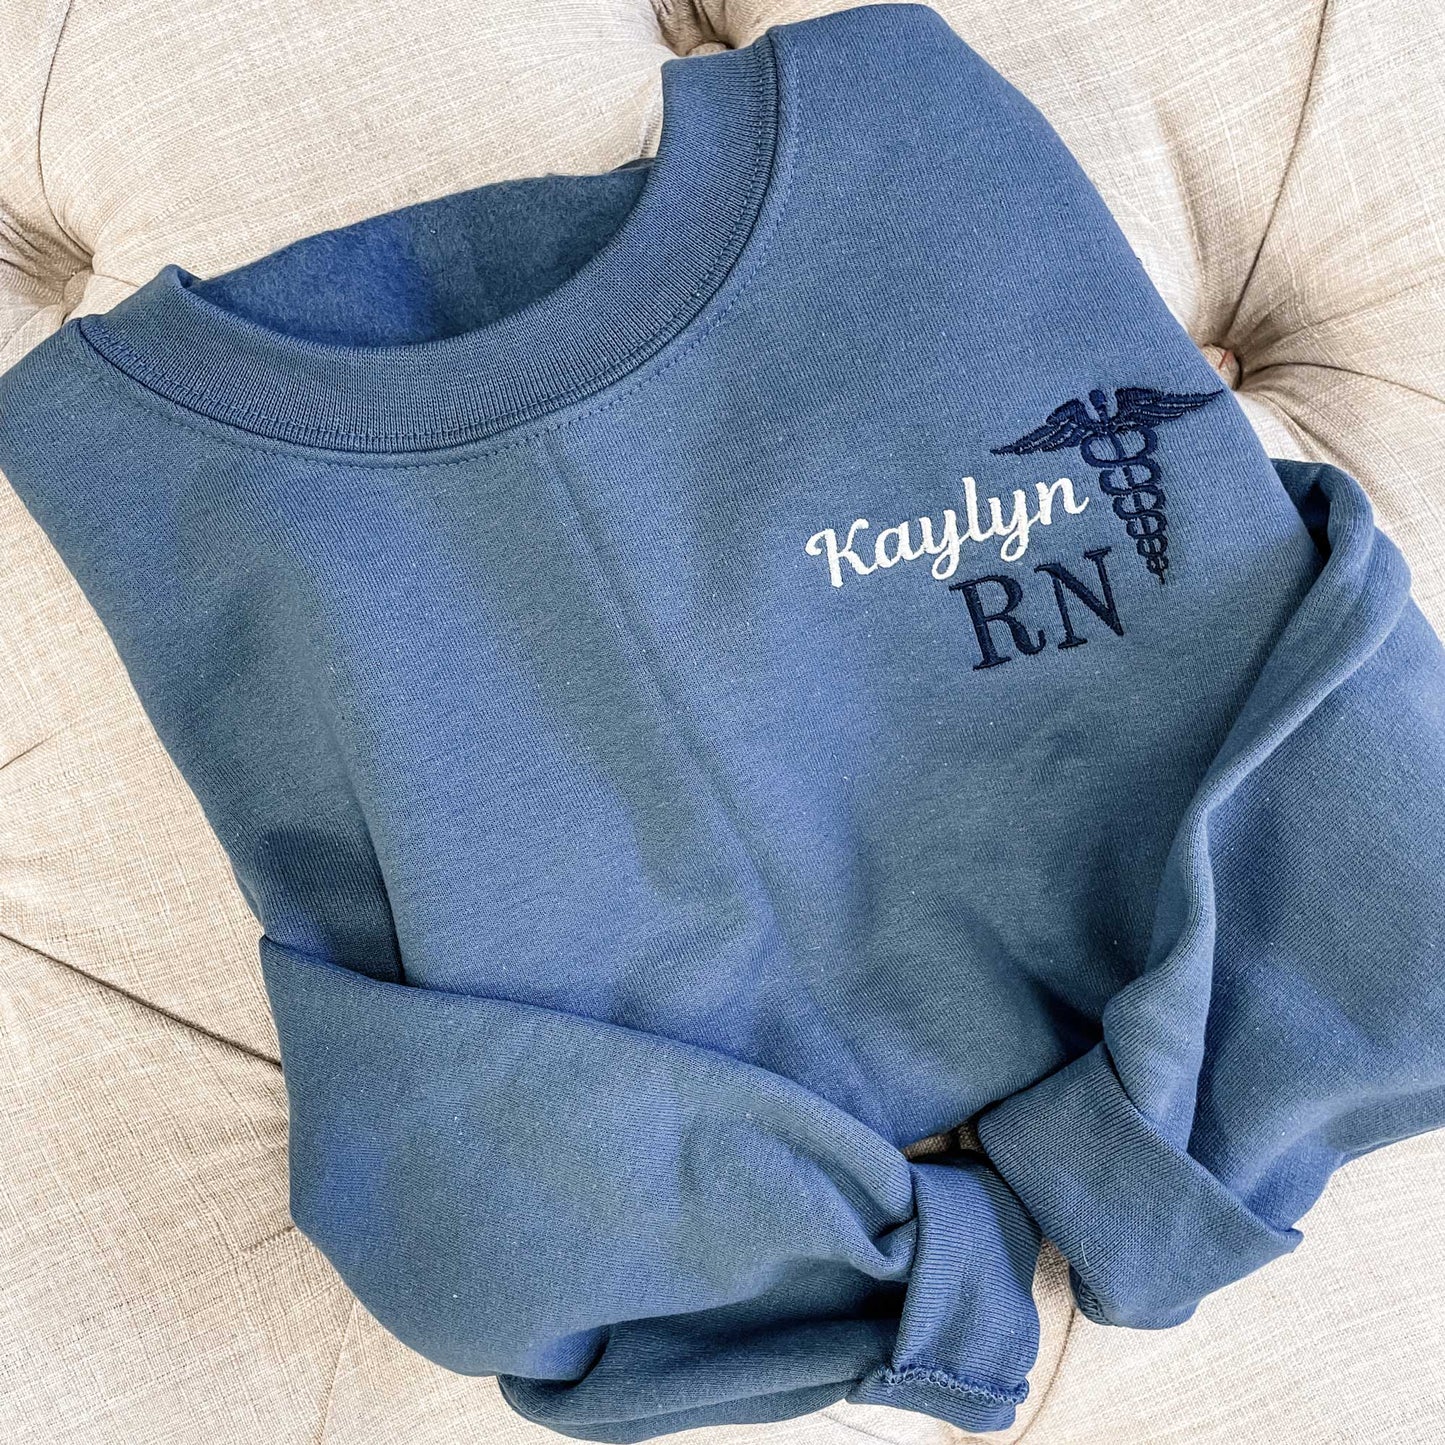 folded indigo blue crewneck sweatshirt with a personalized nurse embroidery design on the left chest